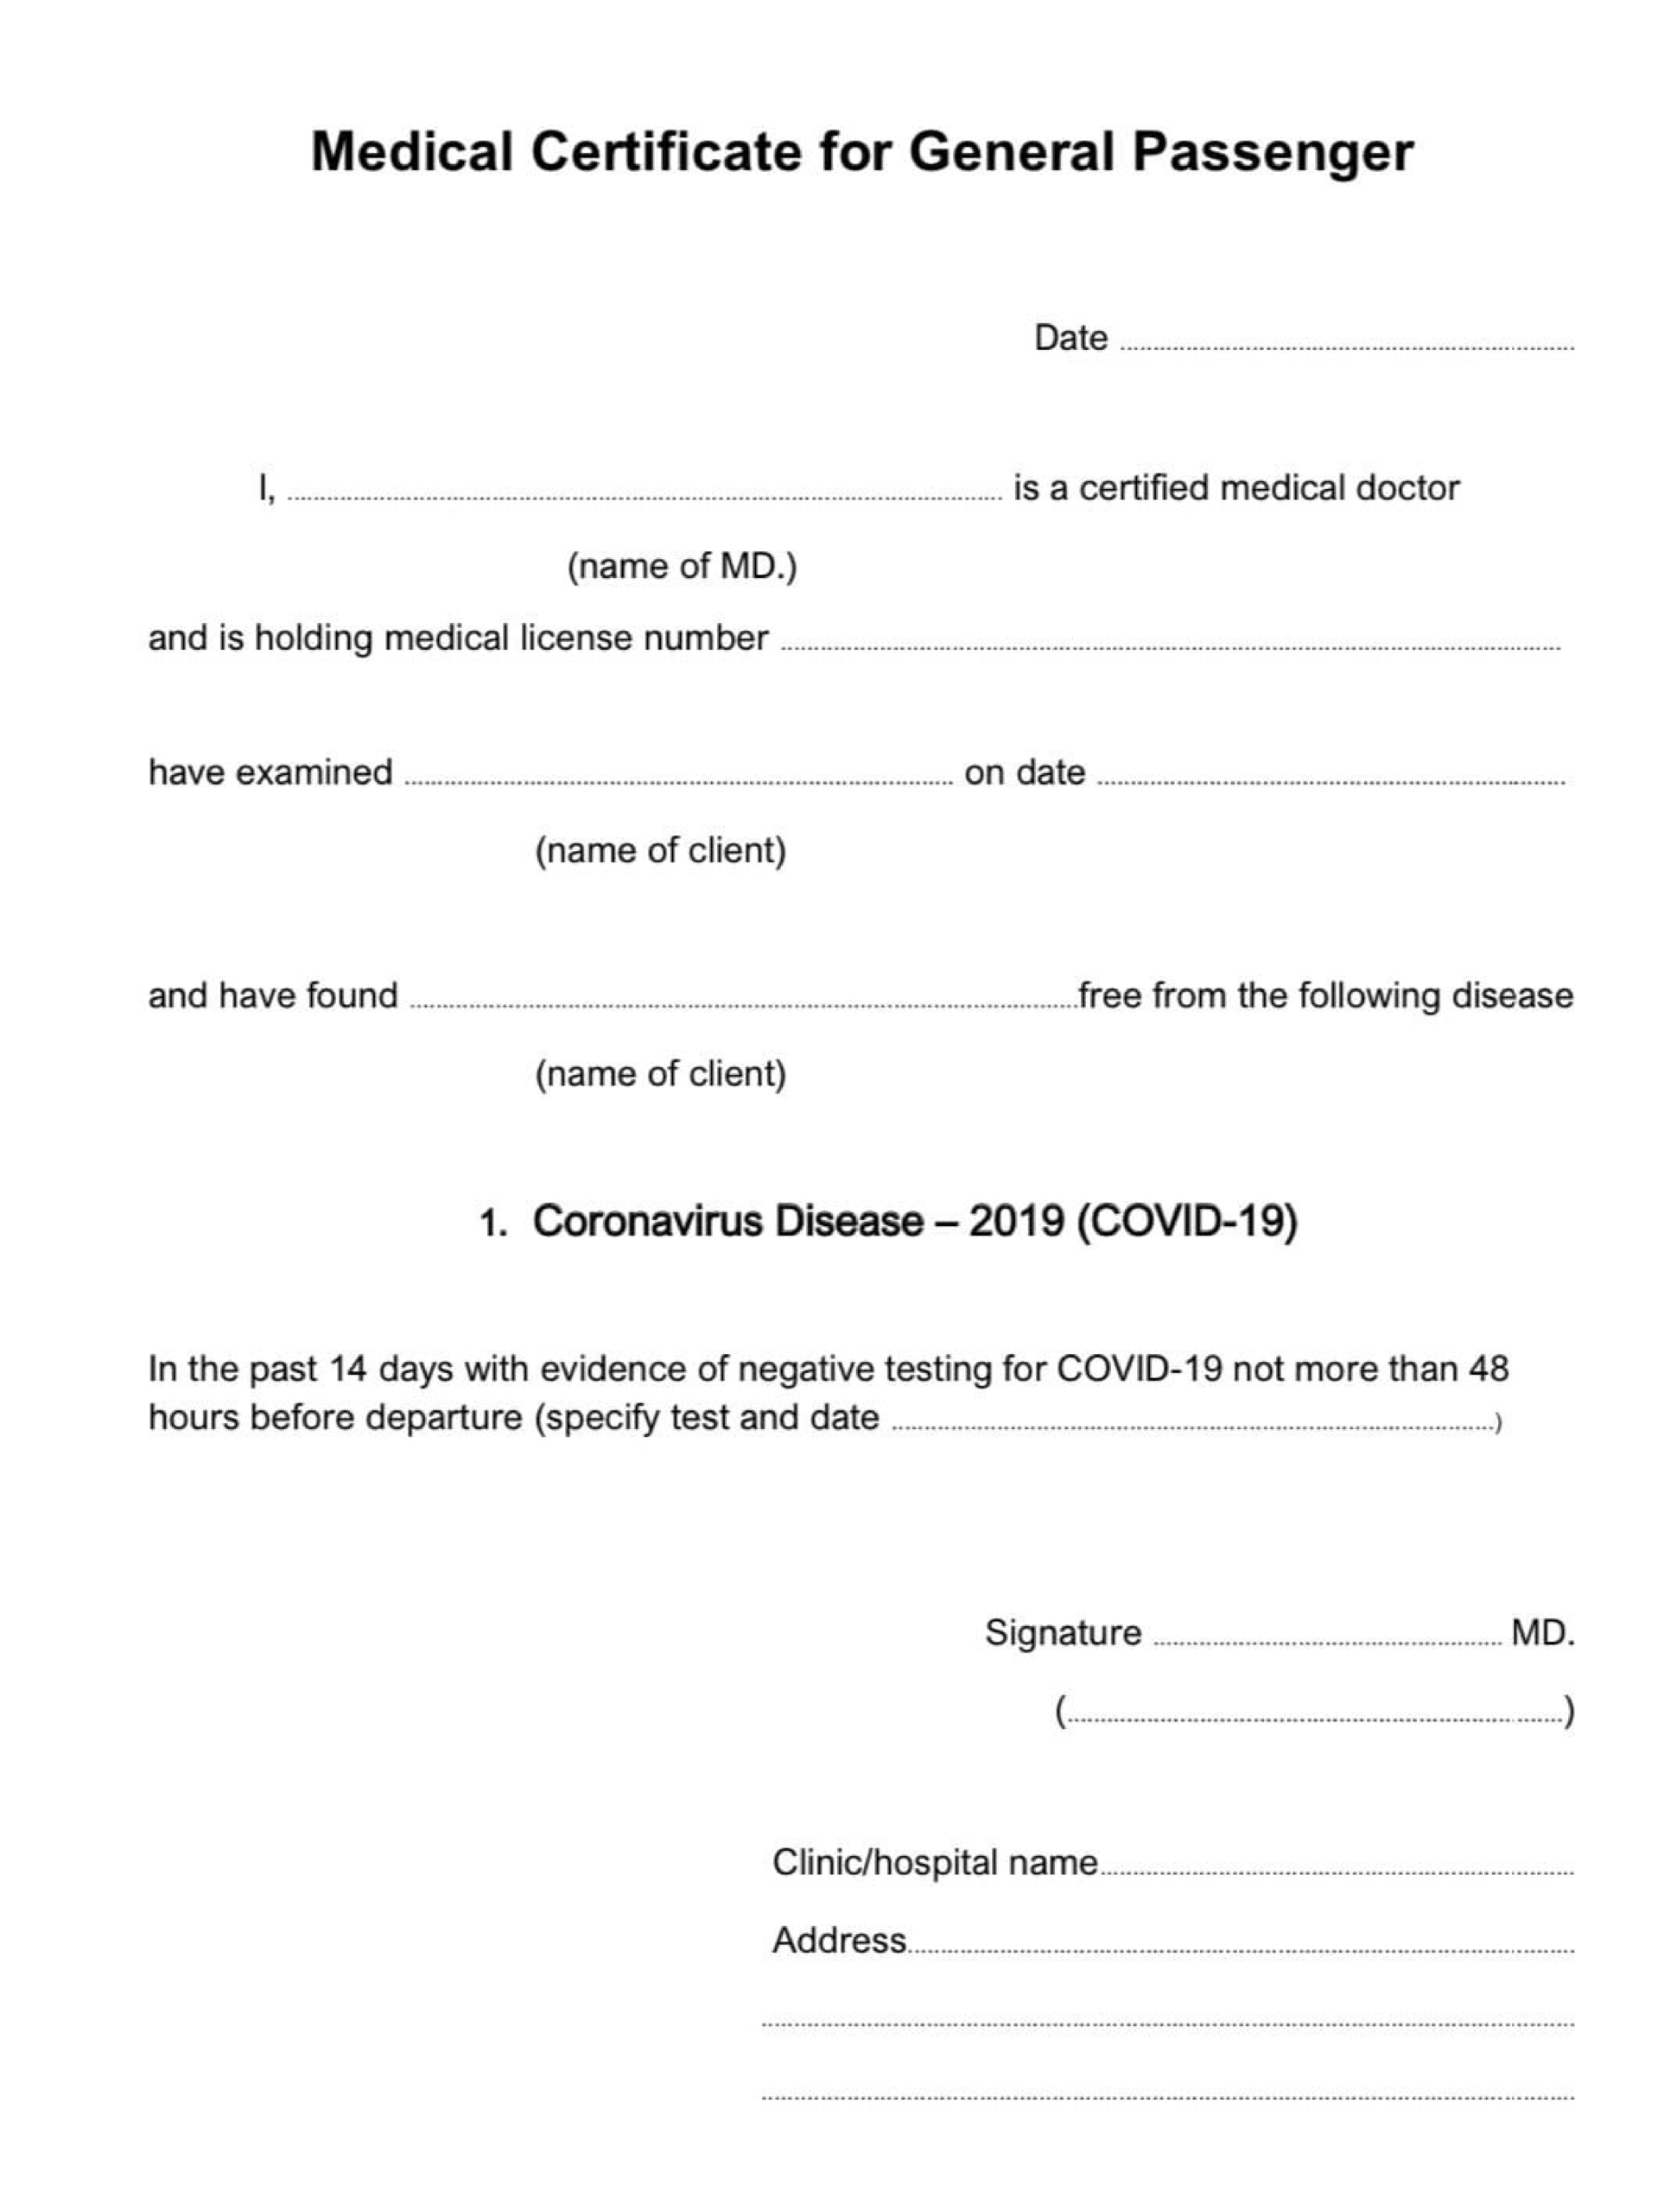 Covid19 Medical Certificate Fit To Fly | Templates At Throughout Free Fake Medical Certificate Template